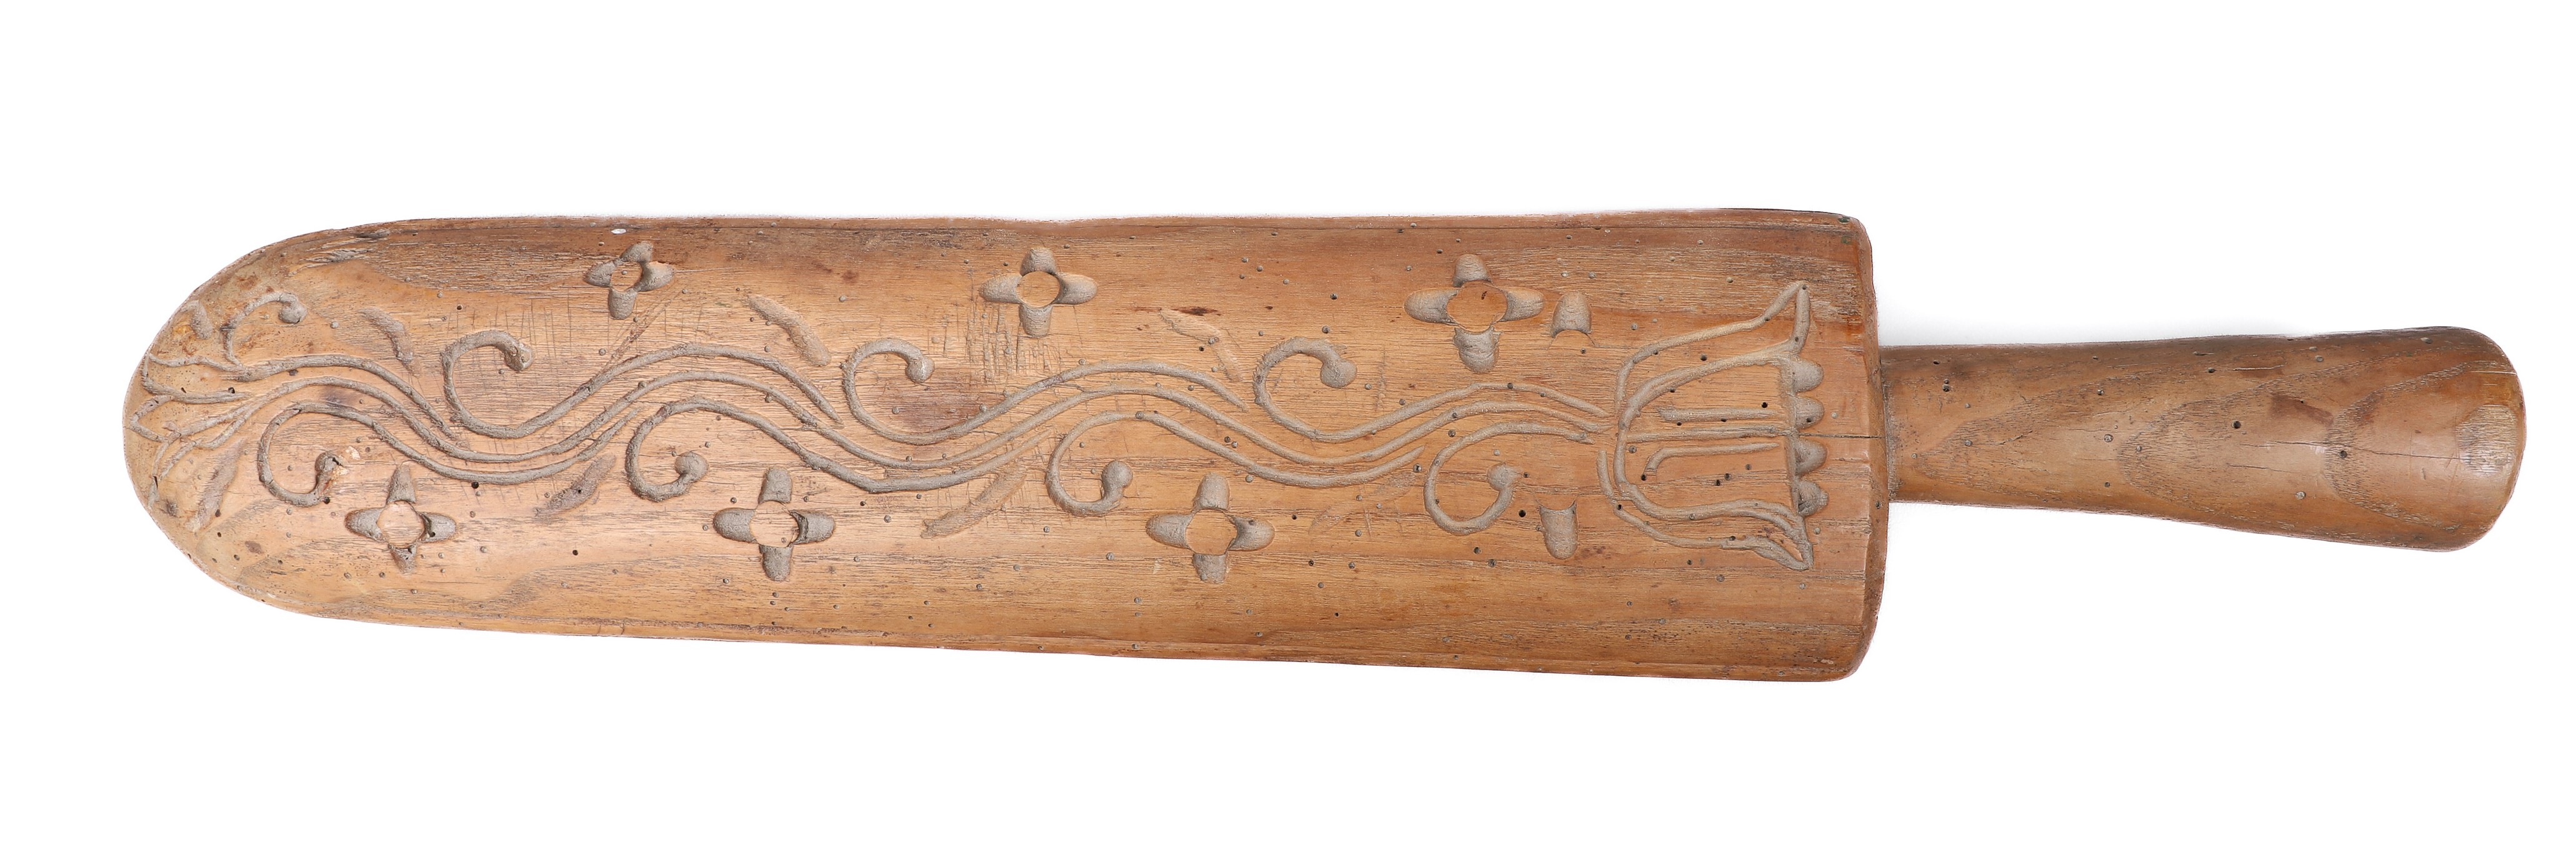 Carved wood mangle board end handle  27a48b